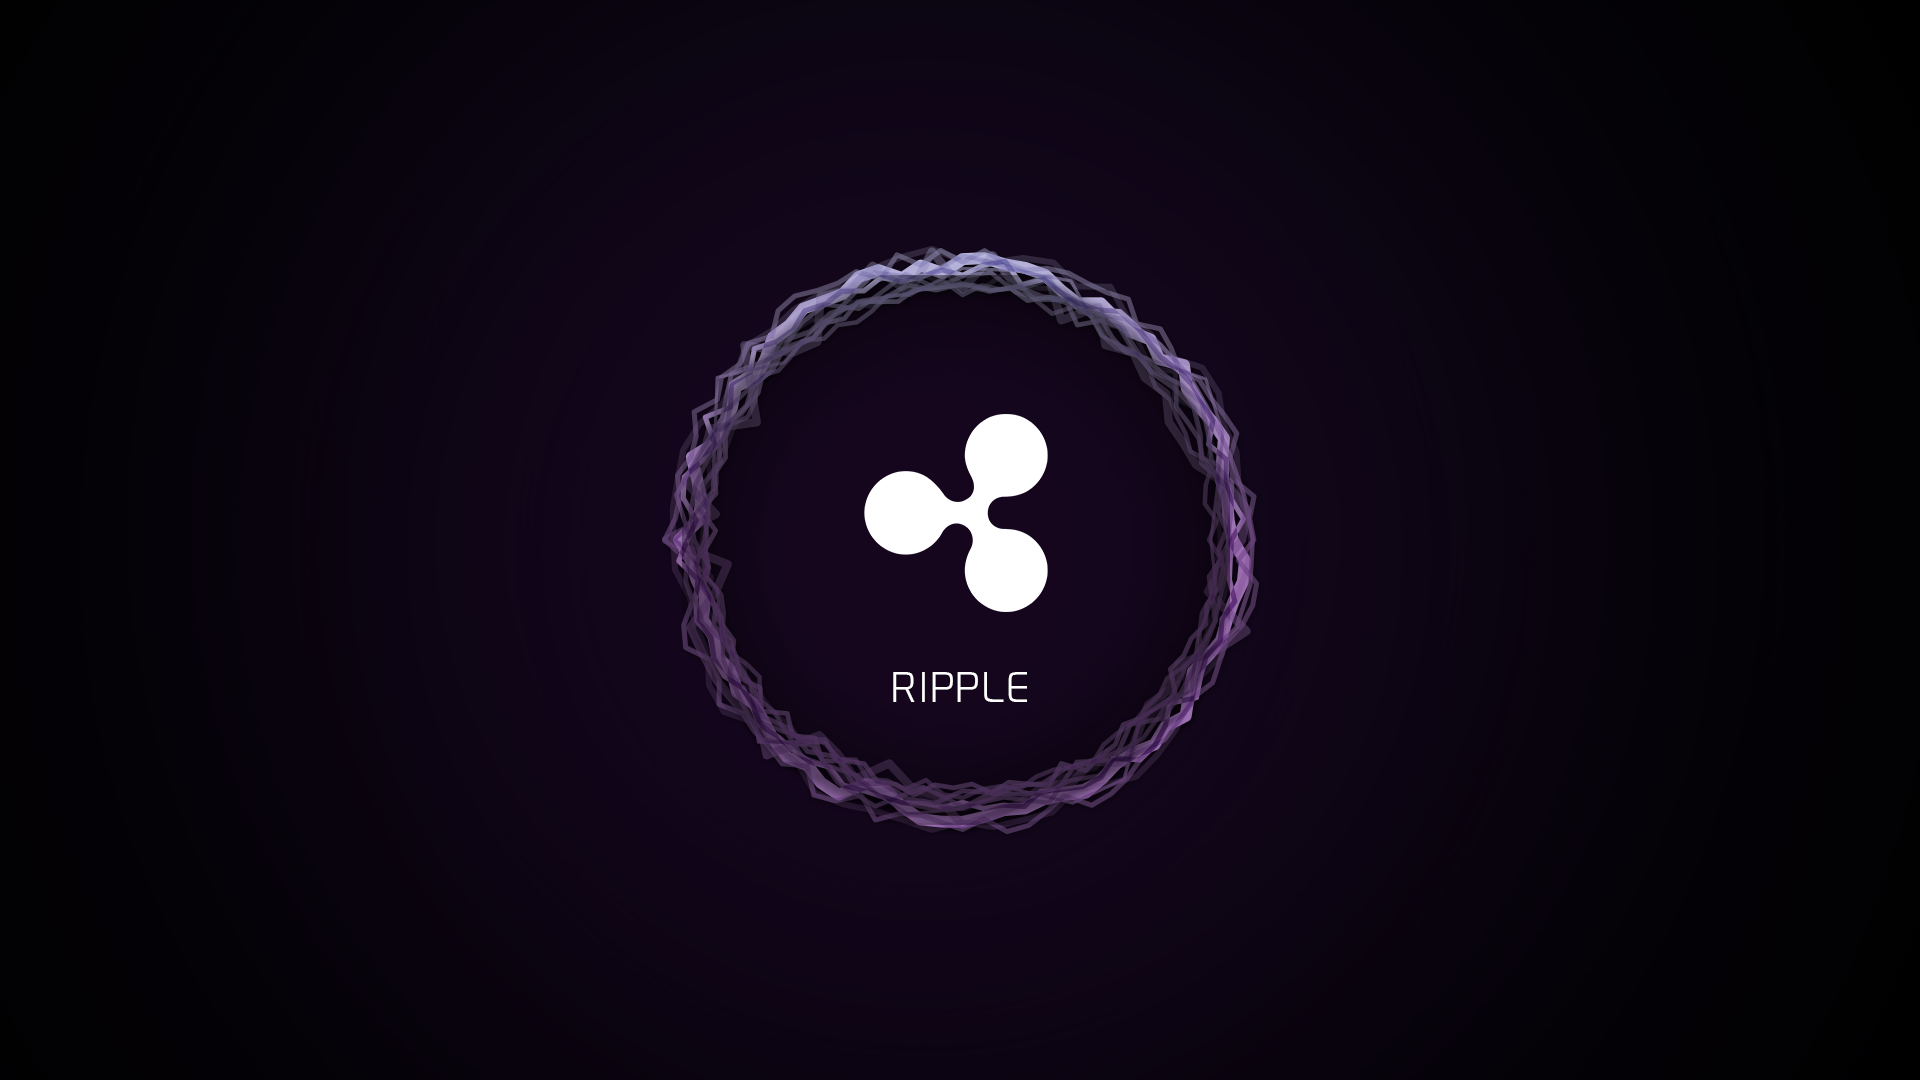 How to Stake XRP: Your Guide to Converting XRP Into Rewards